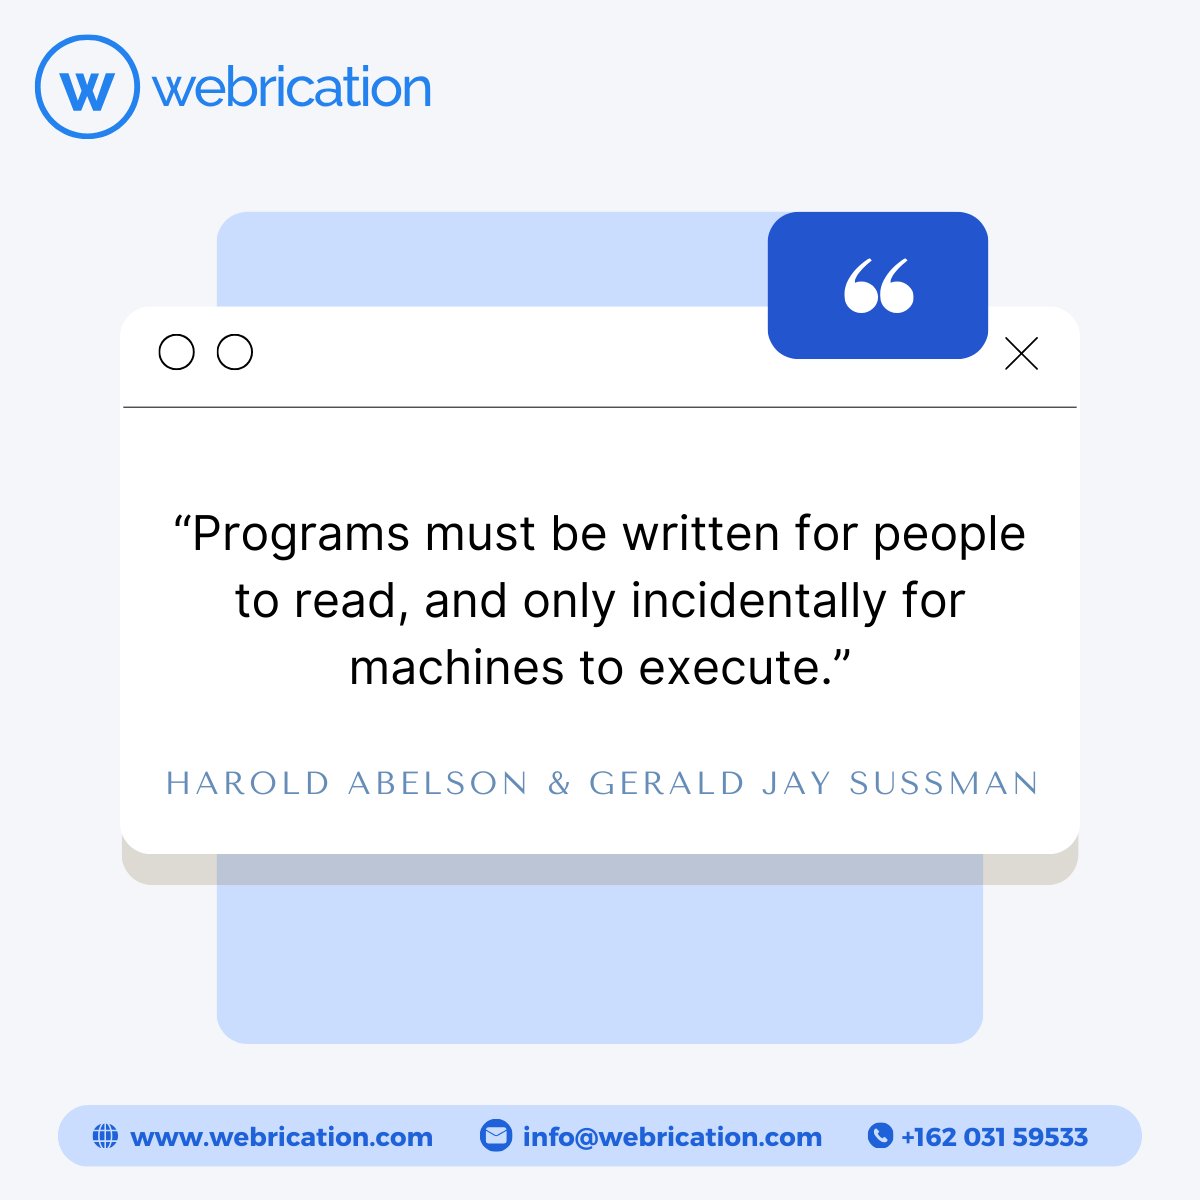 Quote of the Day

“Programs must be written for people to read, and only incidentally for machines to execute.” – Harold Abelson and Gerald Jay Sussman

Get a free quote
Contact us at: info@webrication.com

#quote #websitedesign #developmentservices #digitalmarketingagency